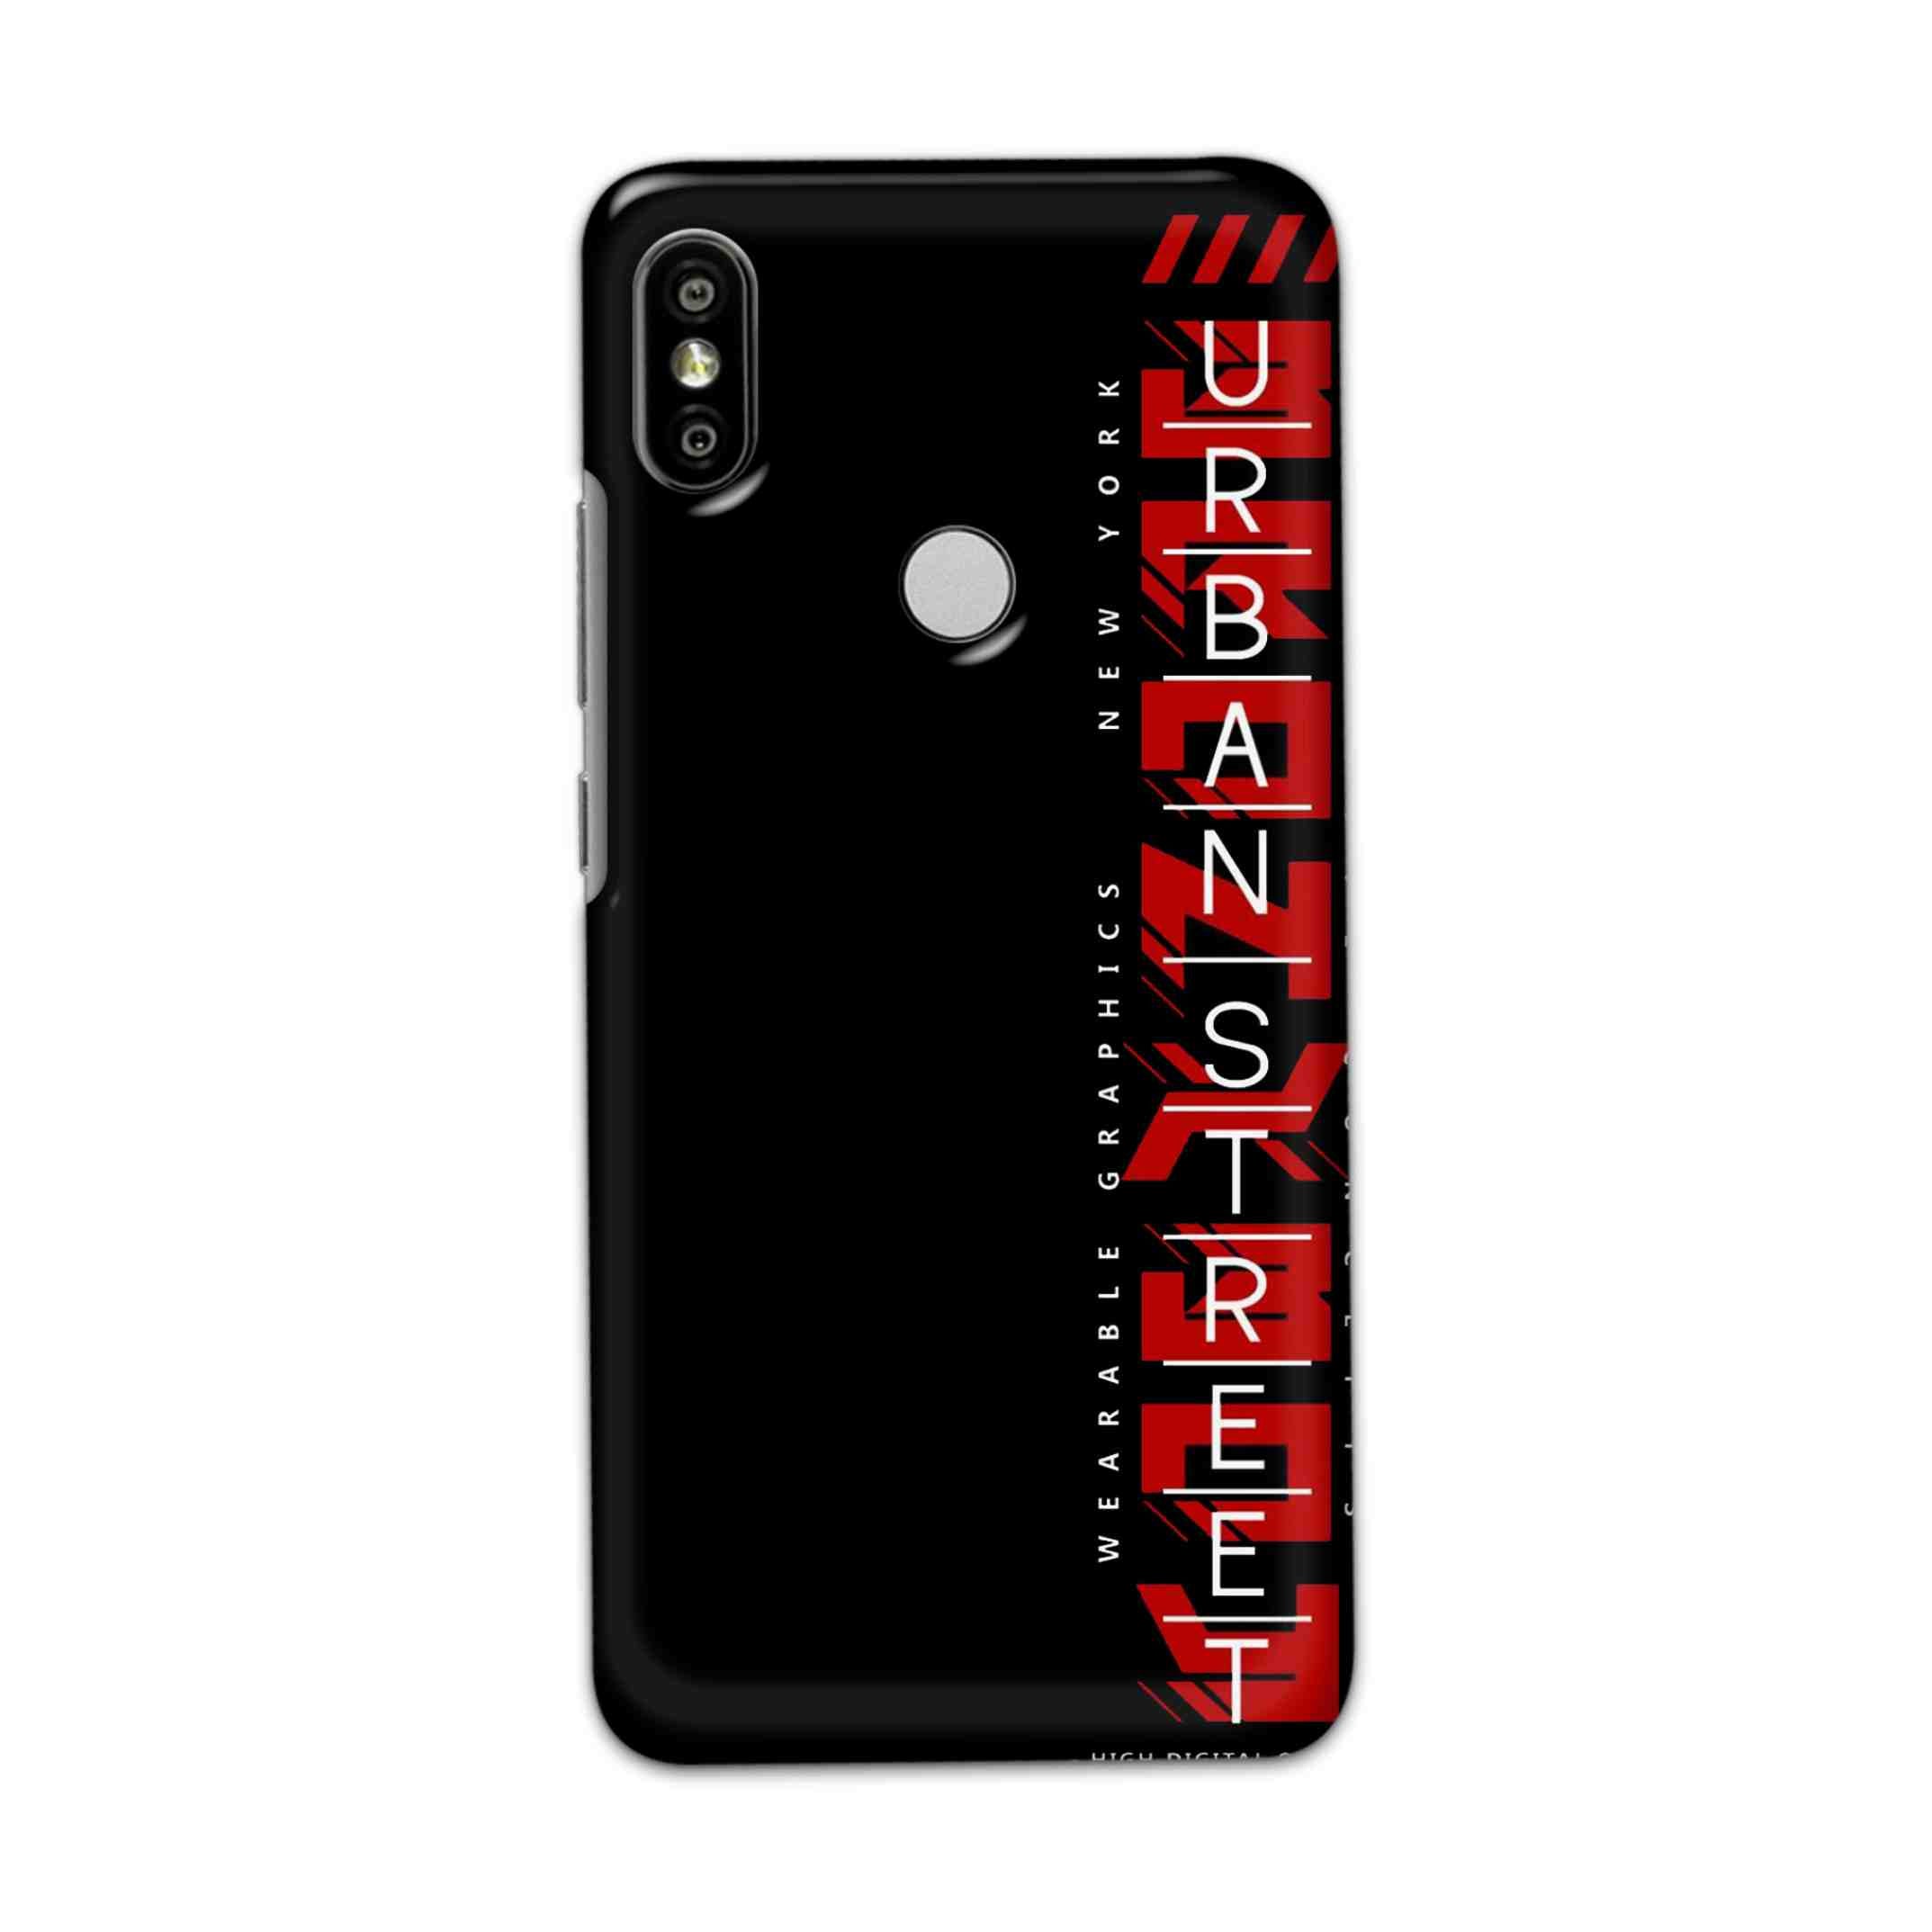 Buy Urban Street Hard Back Mobile Phone Case Cover For Redmi S2 / Y2 Online